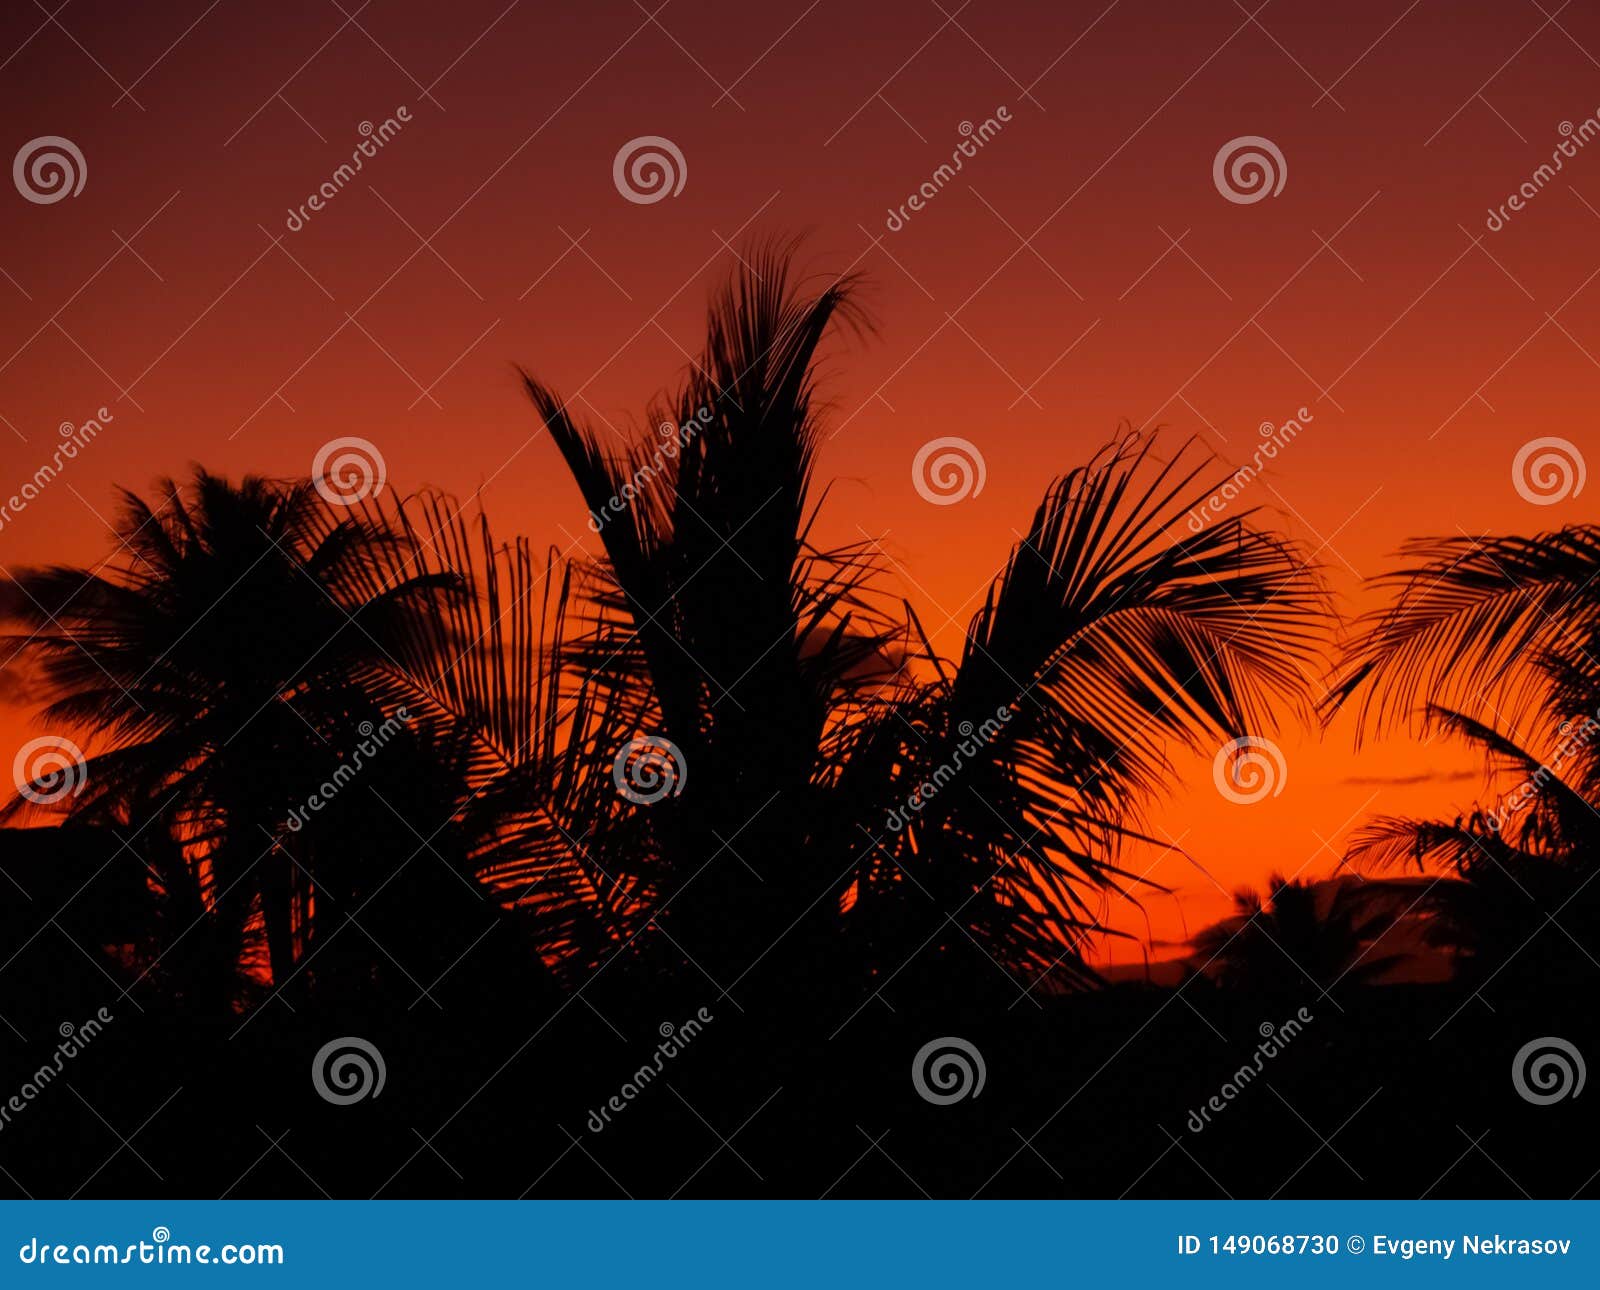 Silhouettes of Palm Branches Against the Bright Orange Sunset Sky